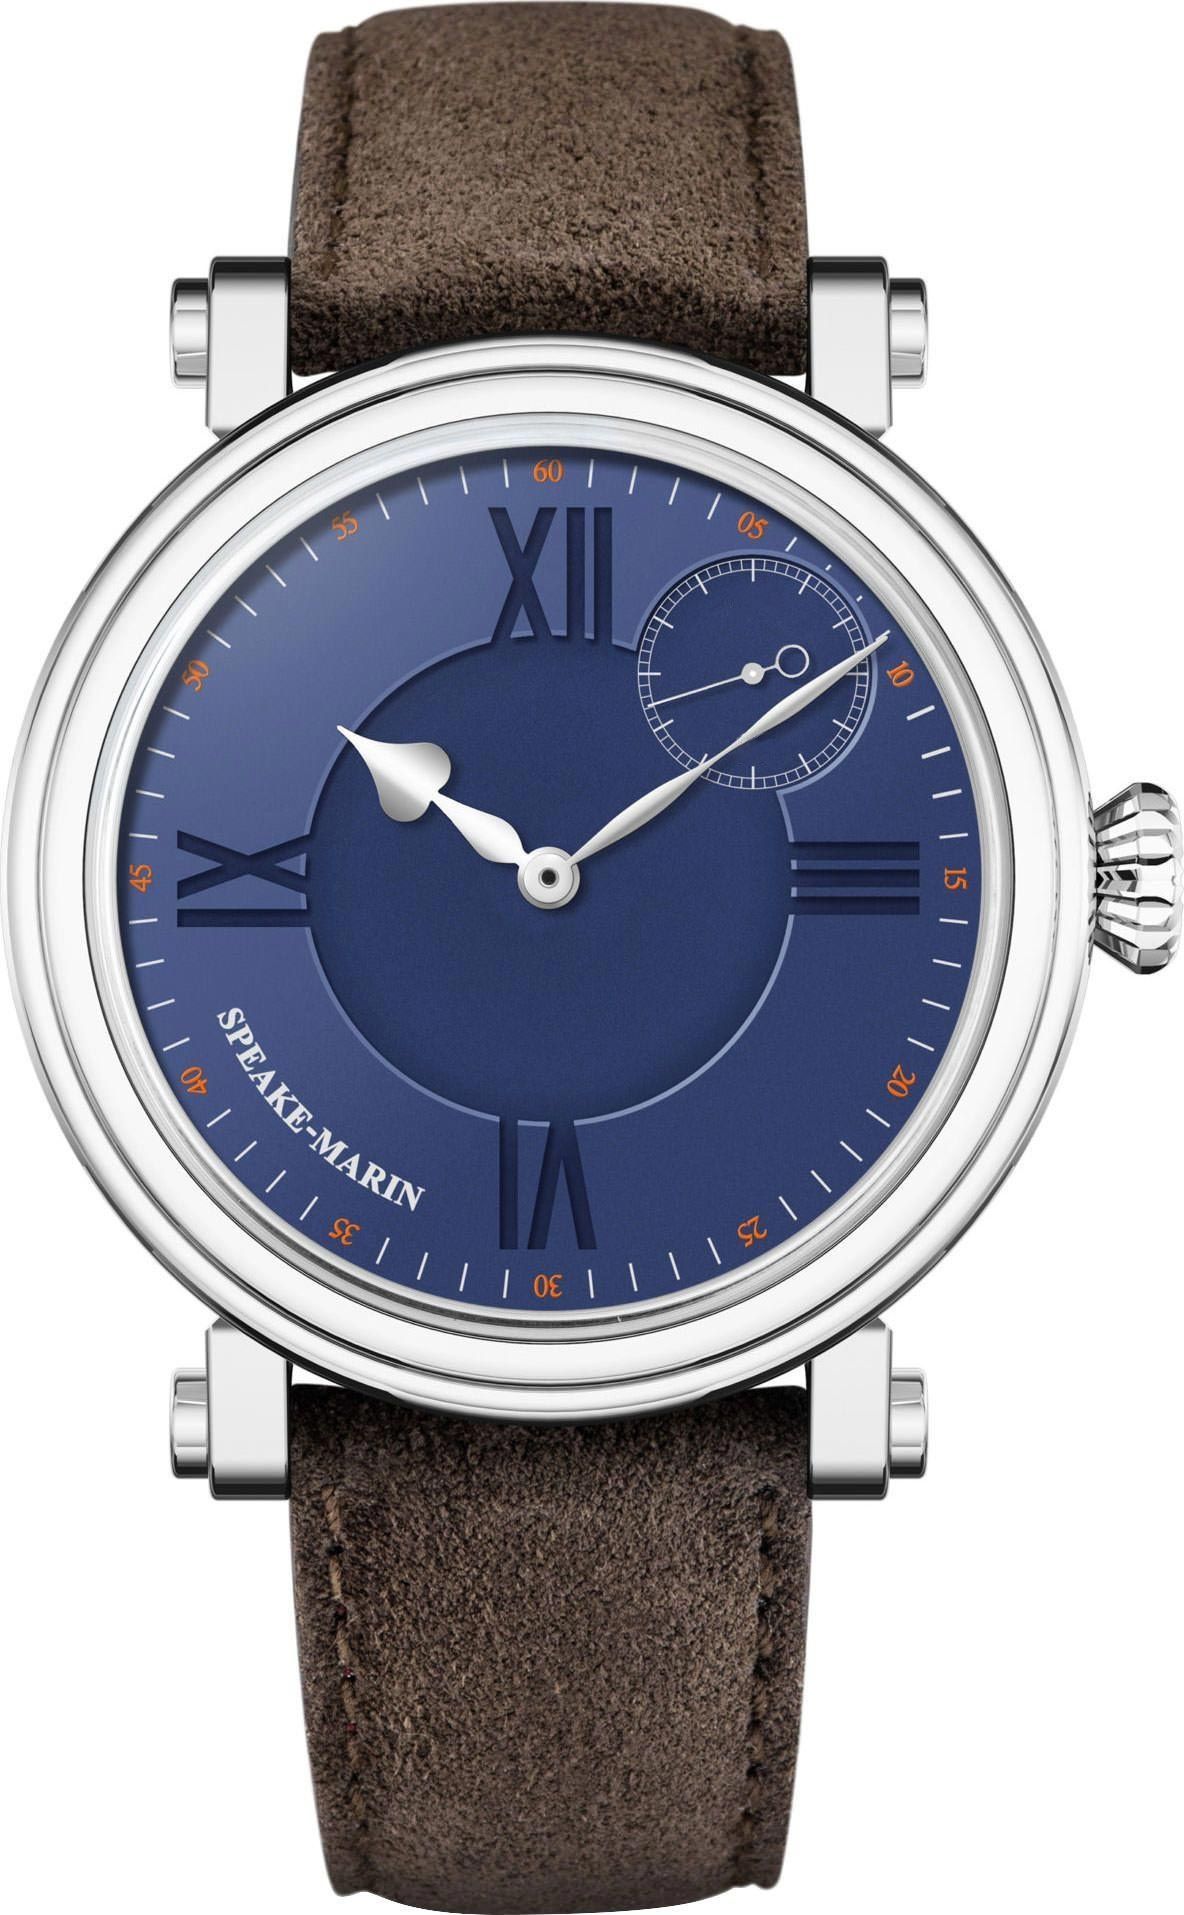 Speake-Marin One & Two Academic Blue Dial 42 mm Automatic Watch For Men - 1